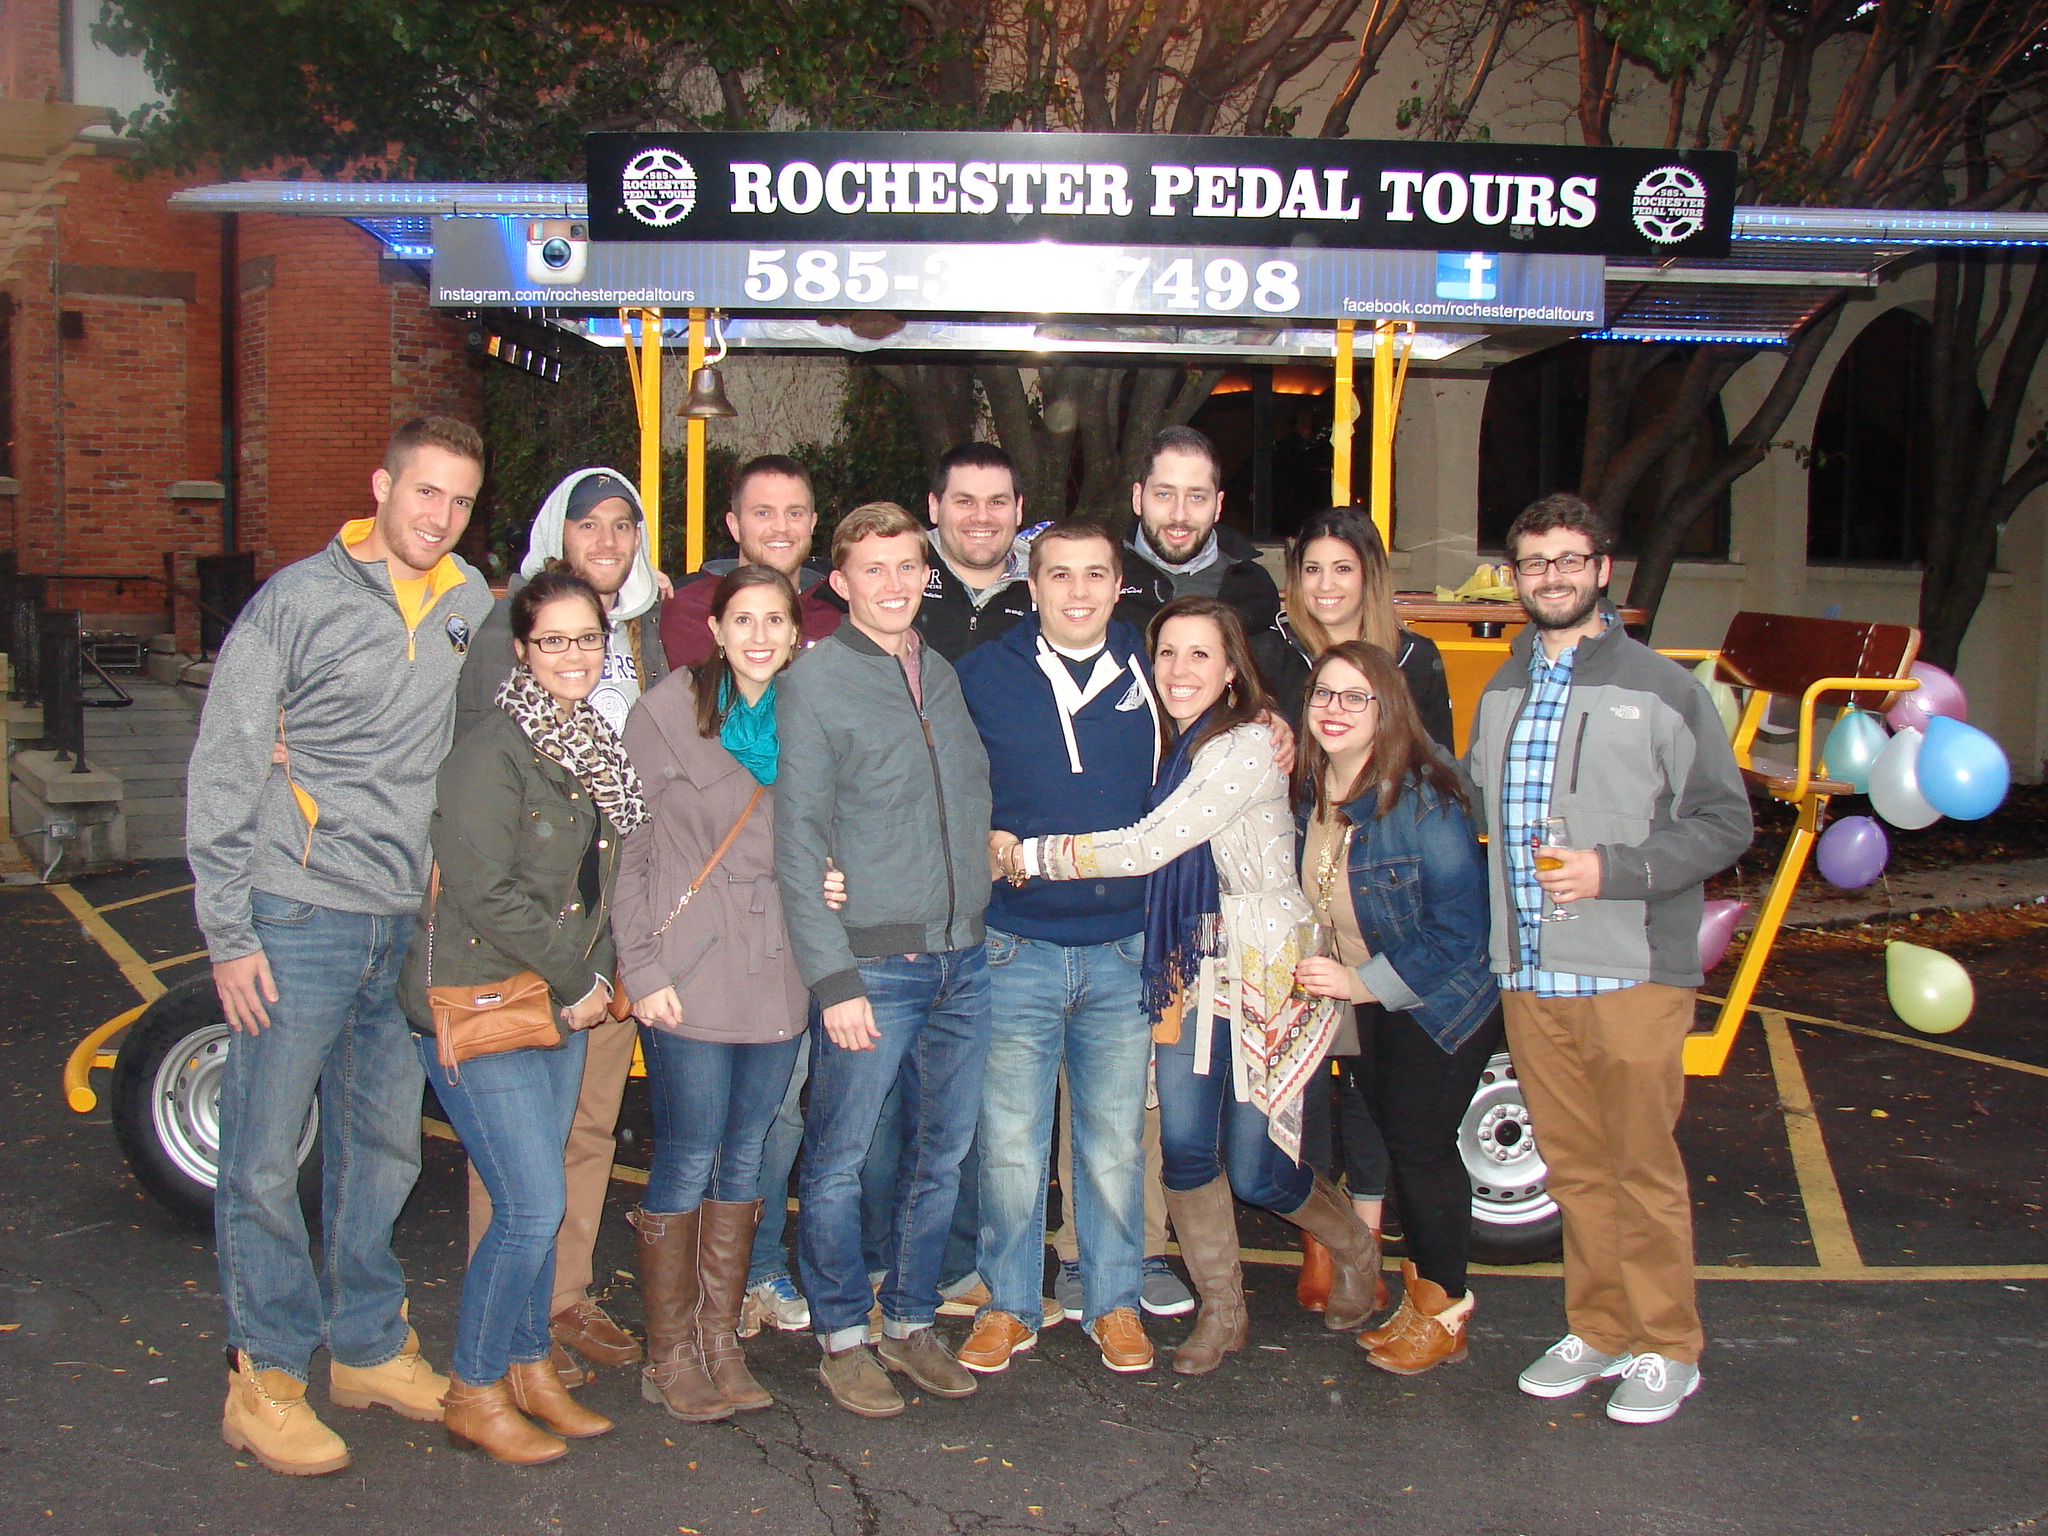 group of people with wide smiles posing for a picture in front of a pedal pub